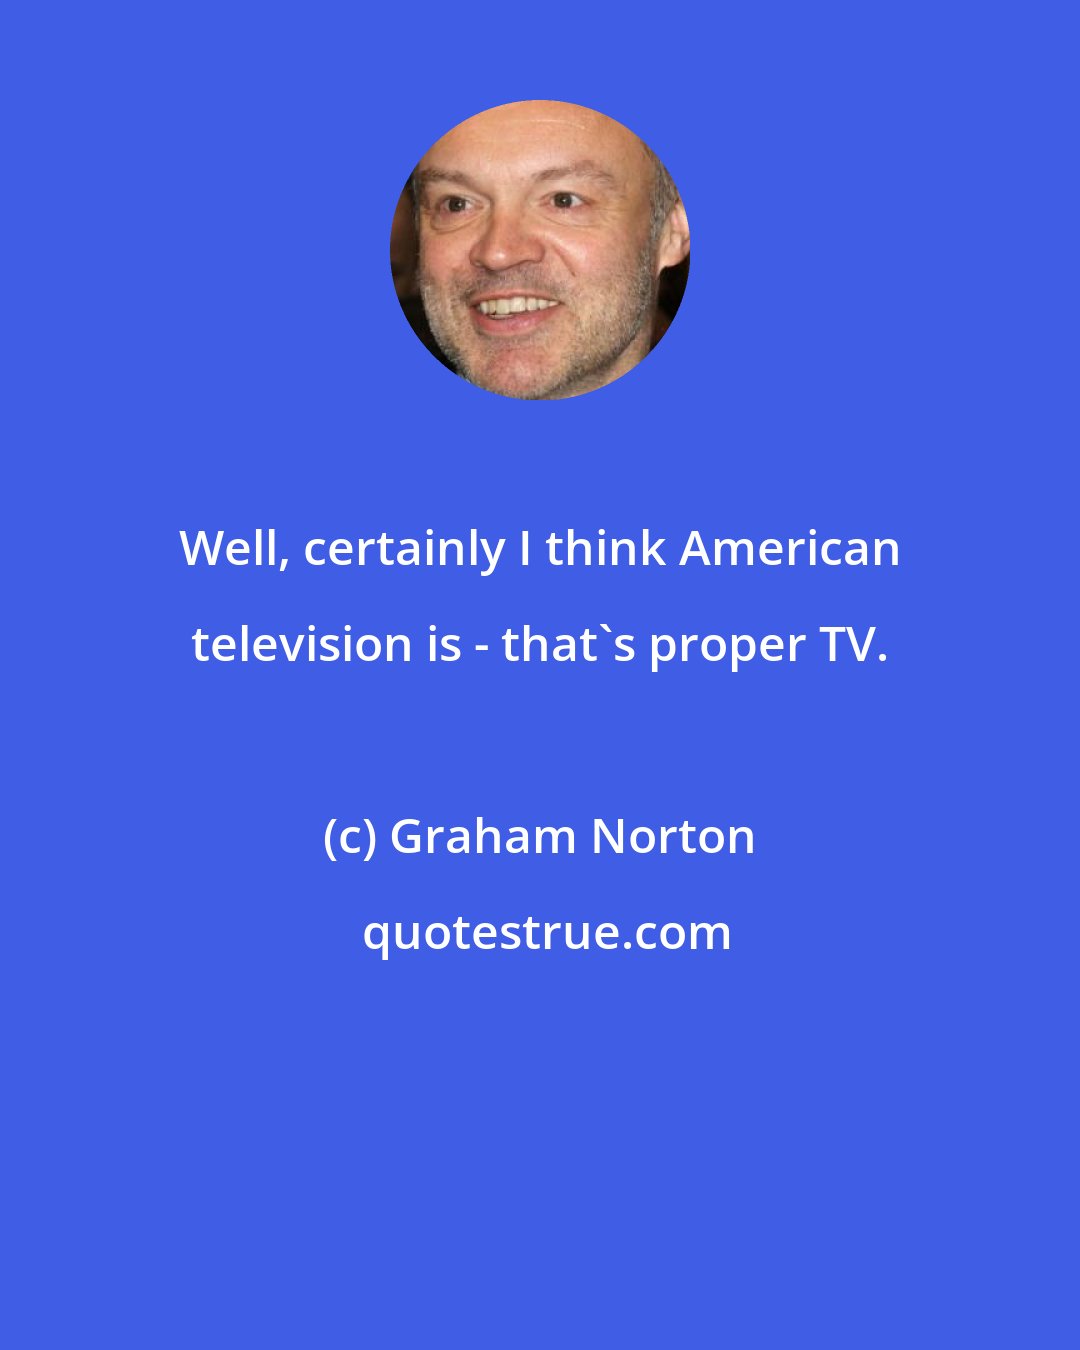 Graham Norton: Well, certainly I think American television is - that's proper TV.